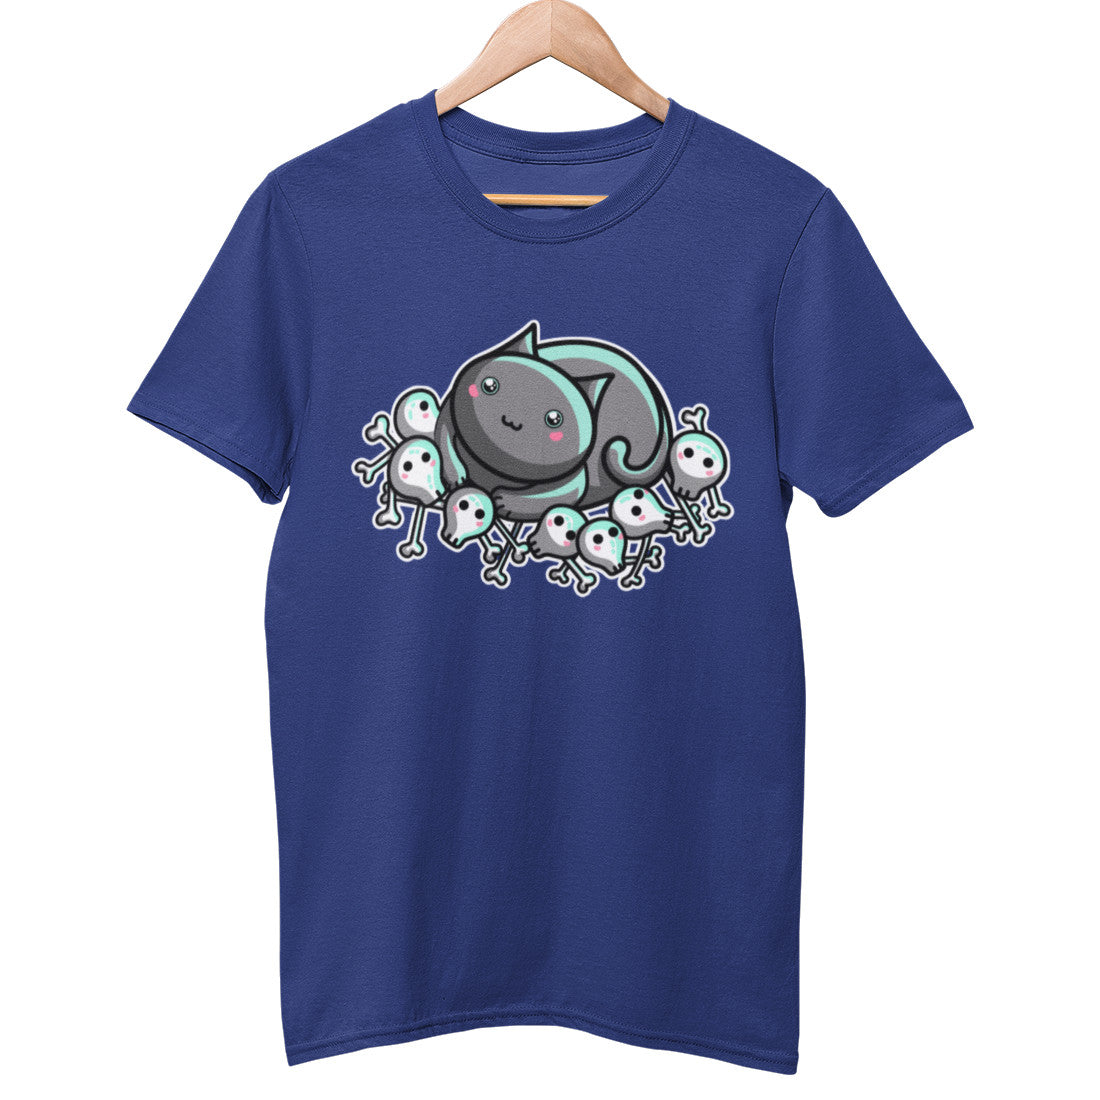 A blue colour unisex crewneck t-shirt on a hanger with a design on its chest of a kawaii cute cat contendedly, looking innocently up, lying on a pile of skulls and bones